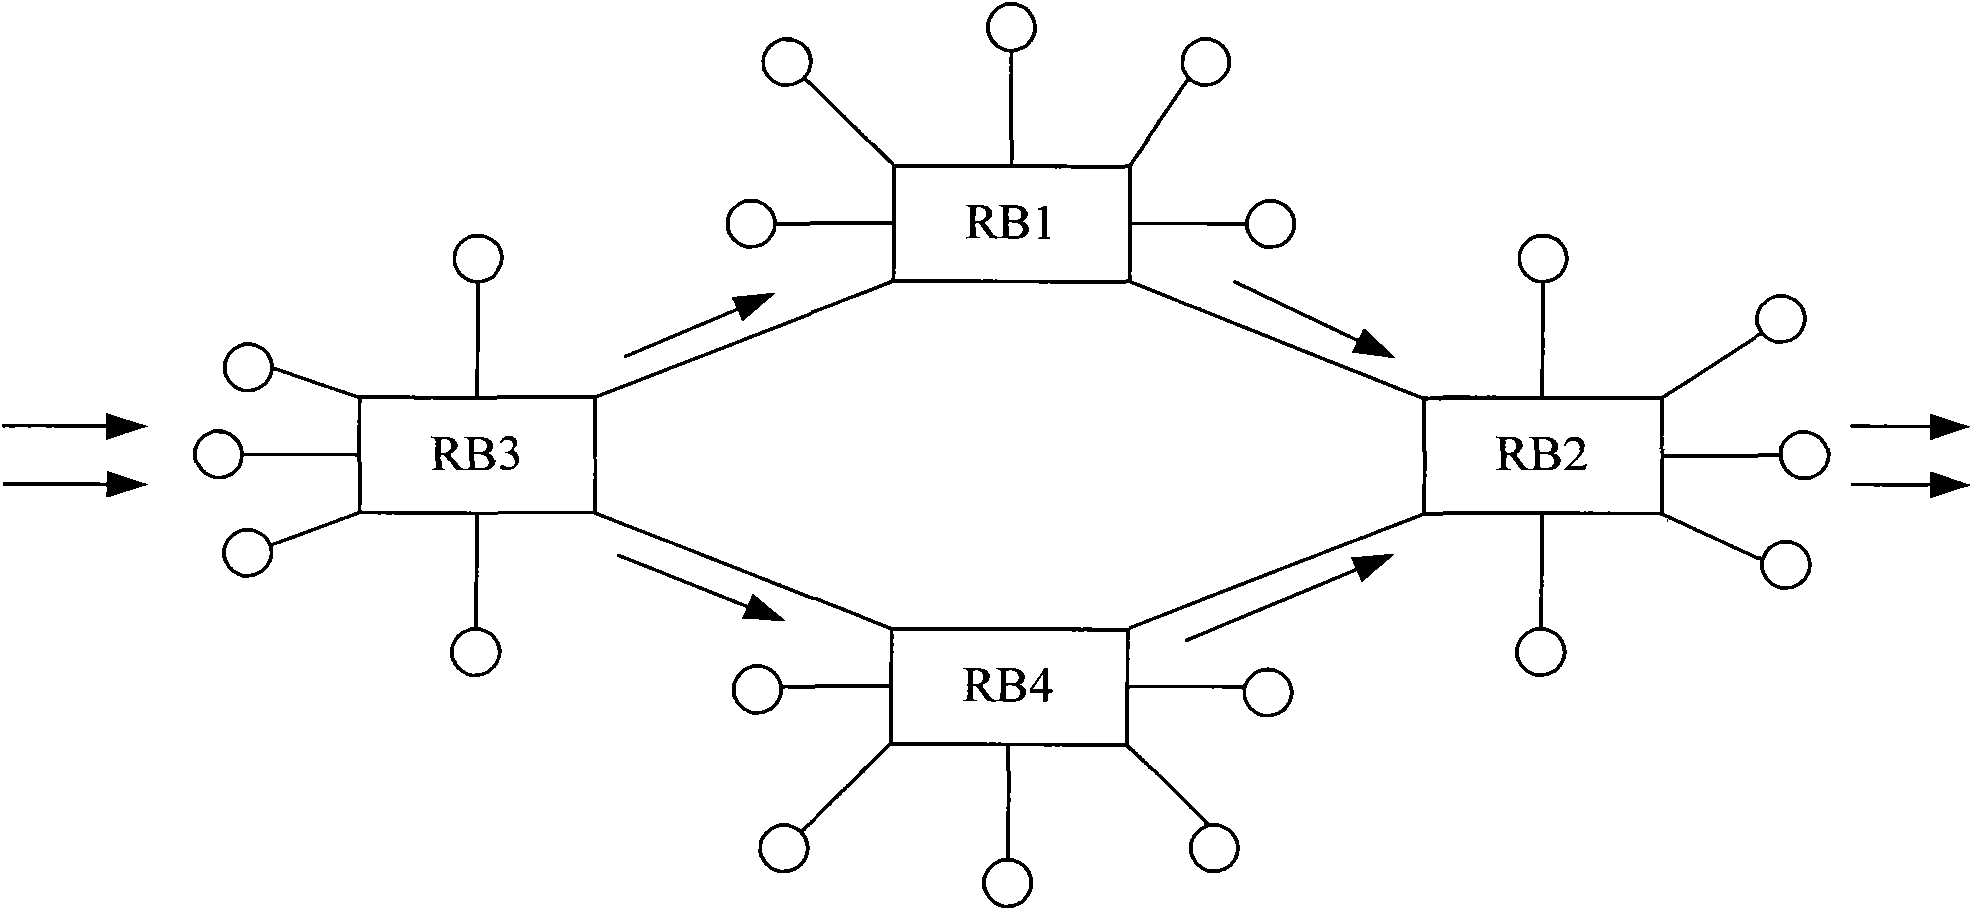 Interconnection method of transparent interconnection network of lots of links in different places and operator edge device